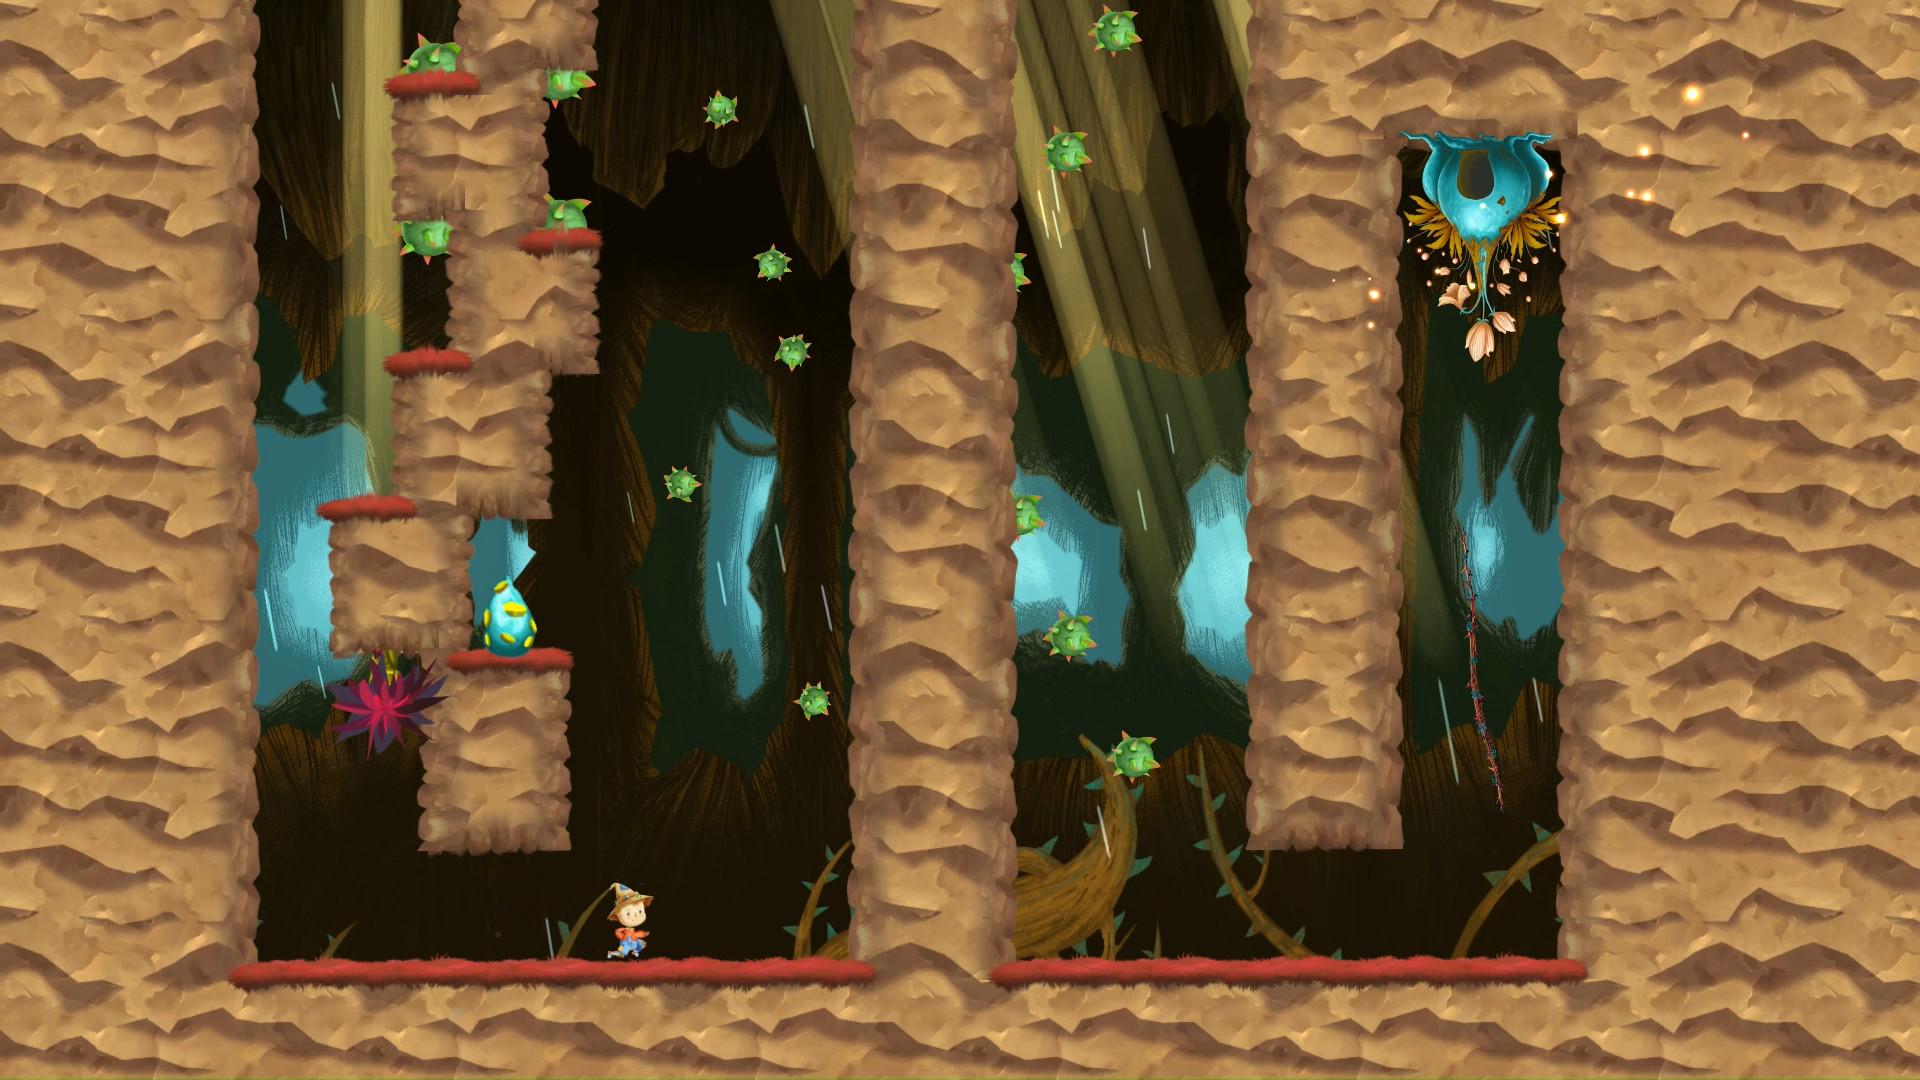 Screenshot №8 from game Upside Down